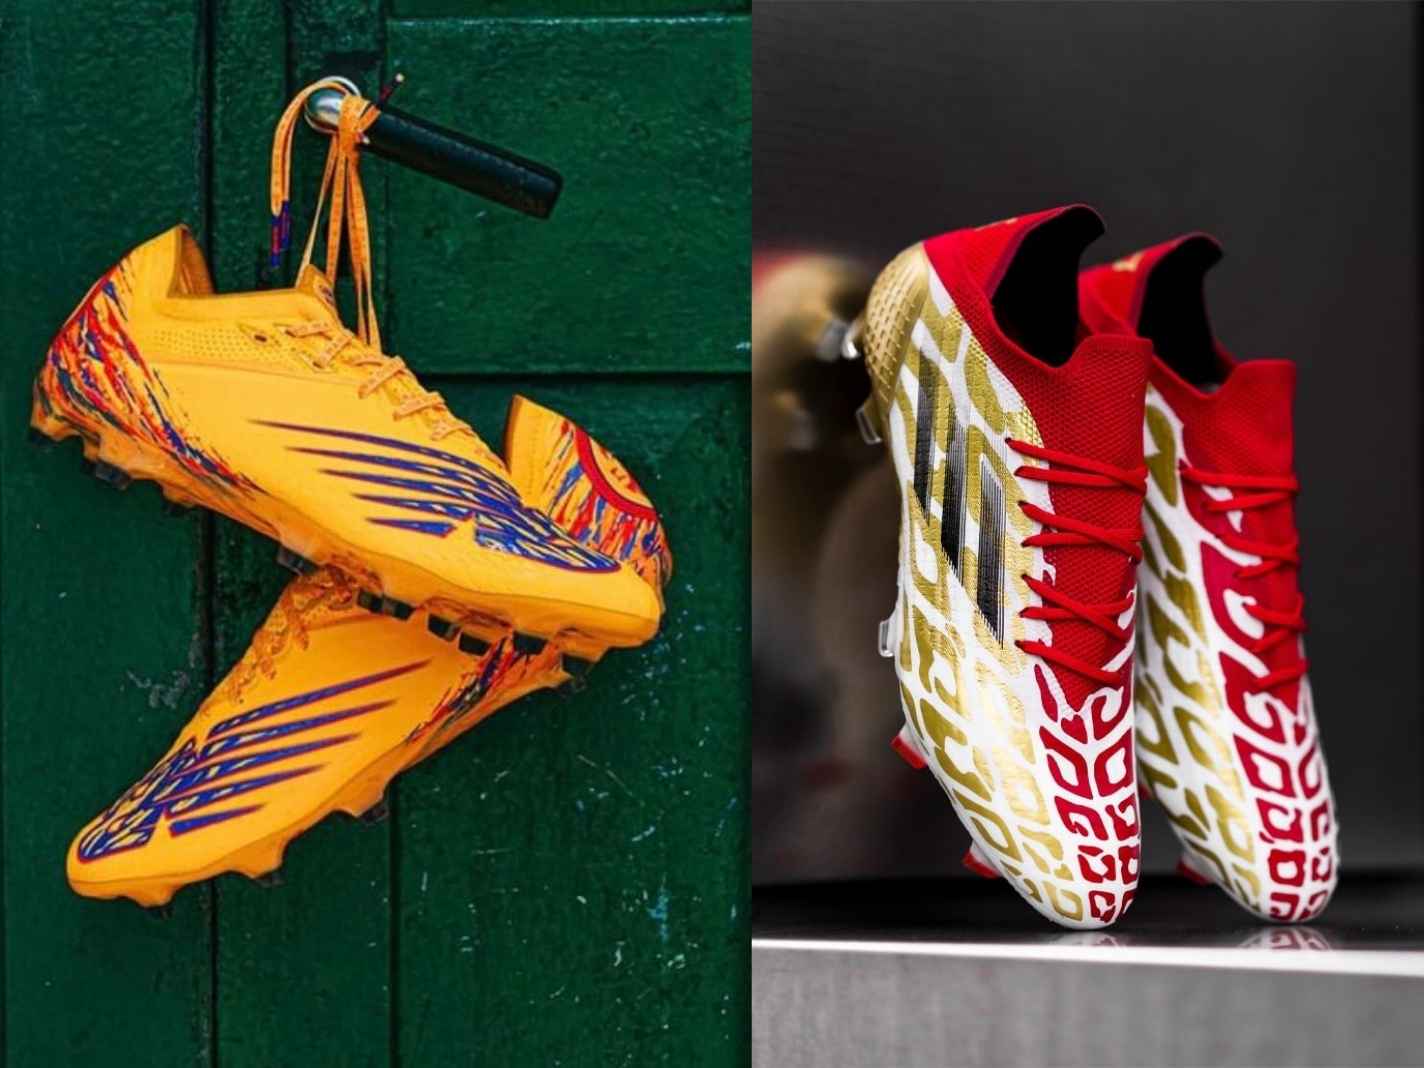 The signature boots Sadio Mane and Mo Salah are about to unleash at AFCON